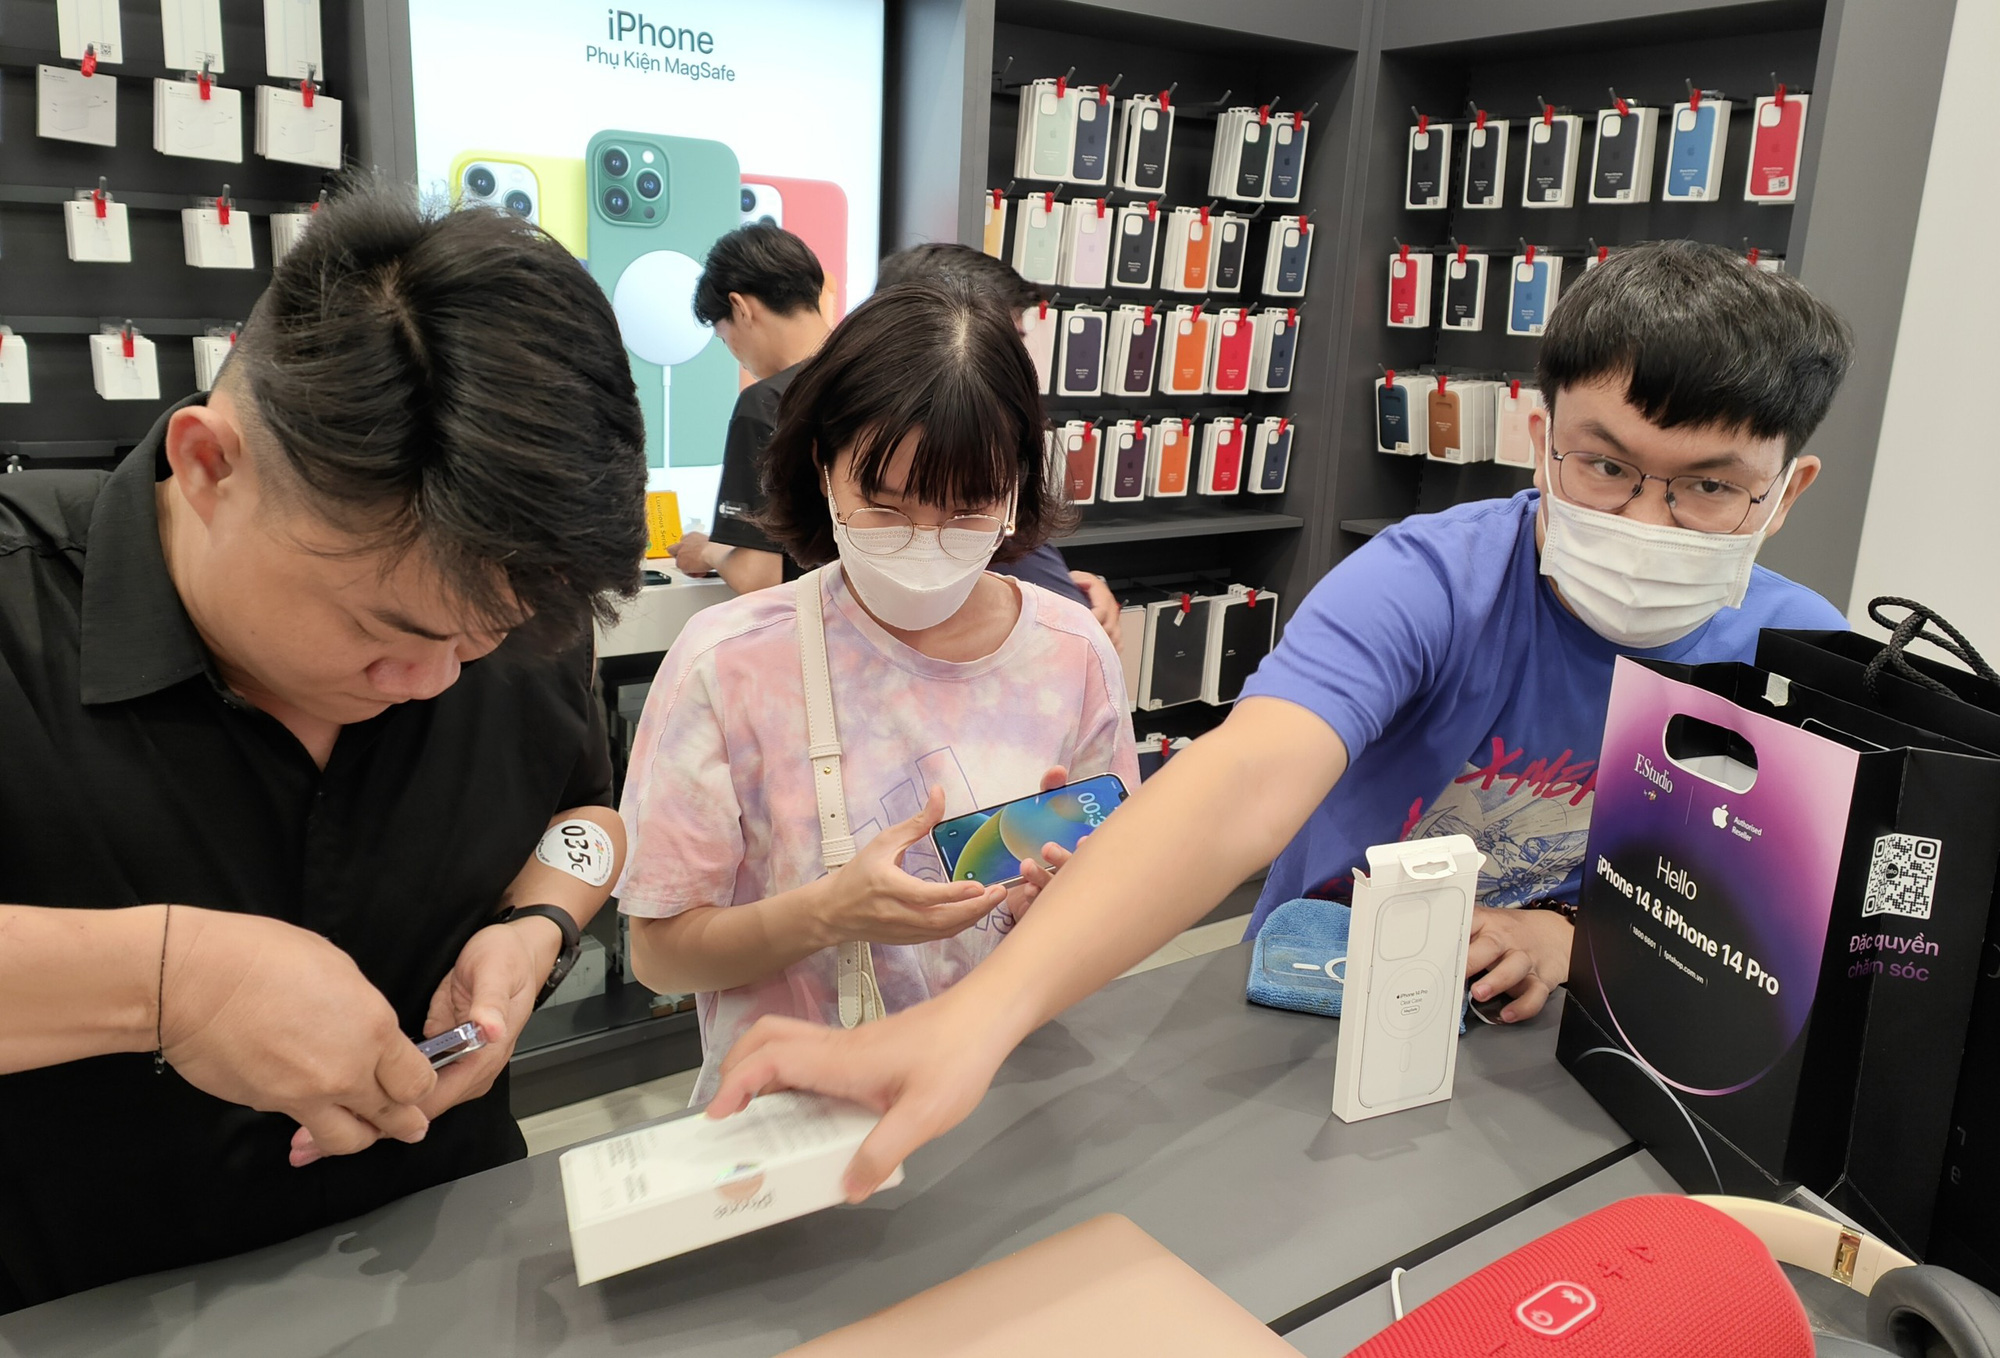 Low demand drives down iPhone 14 prices in Vietnam